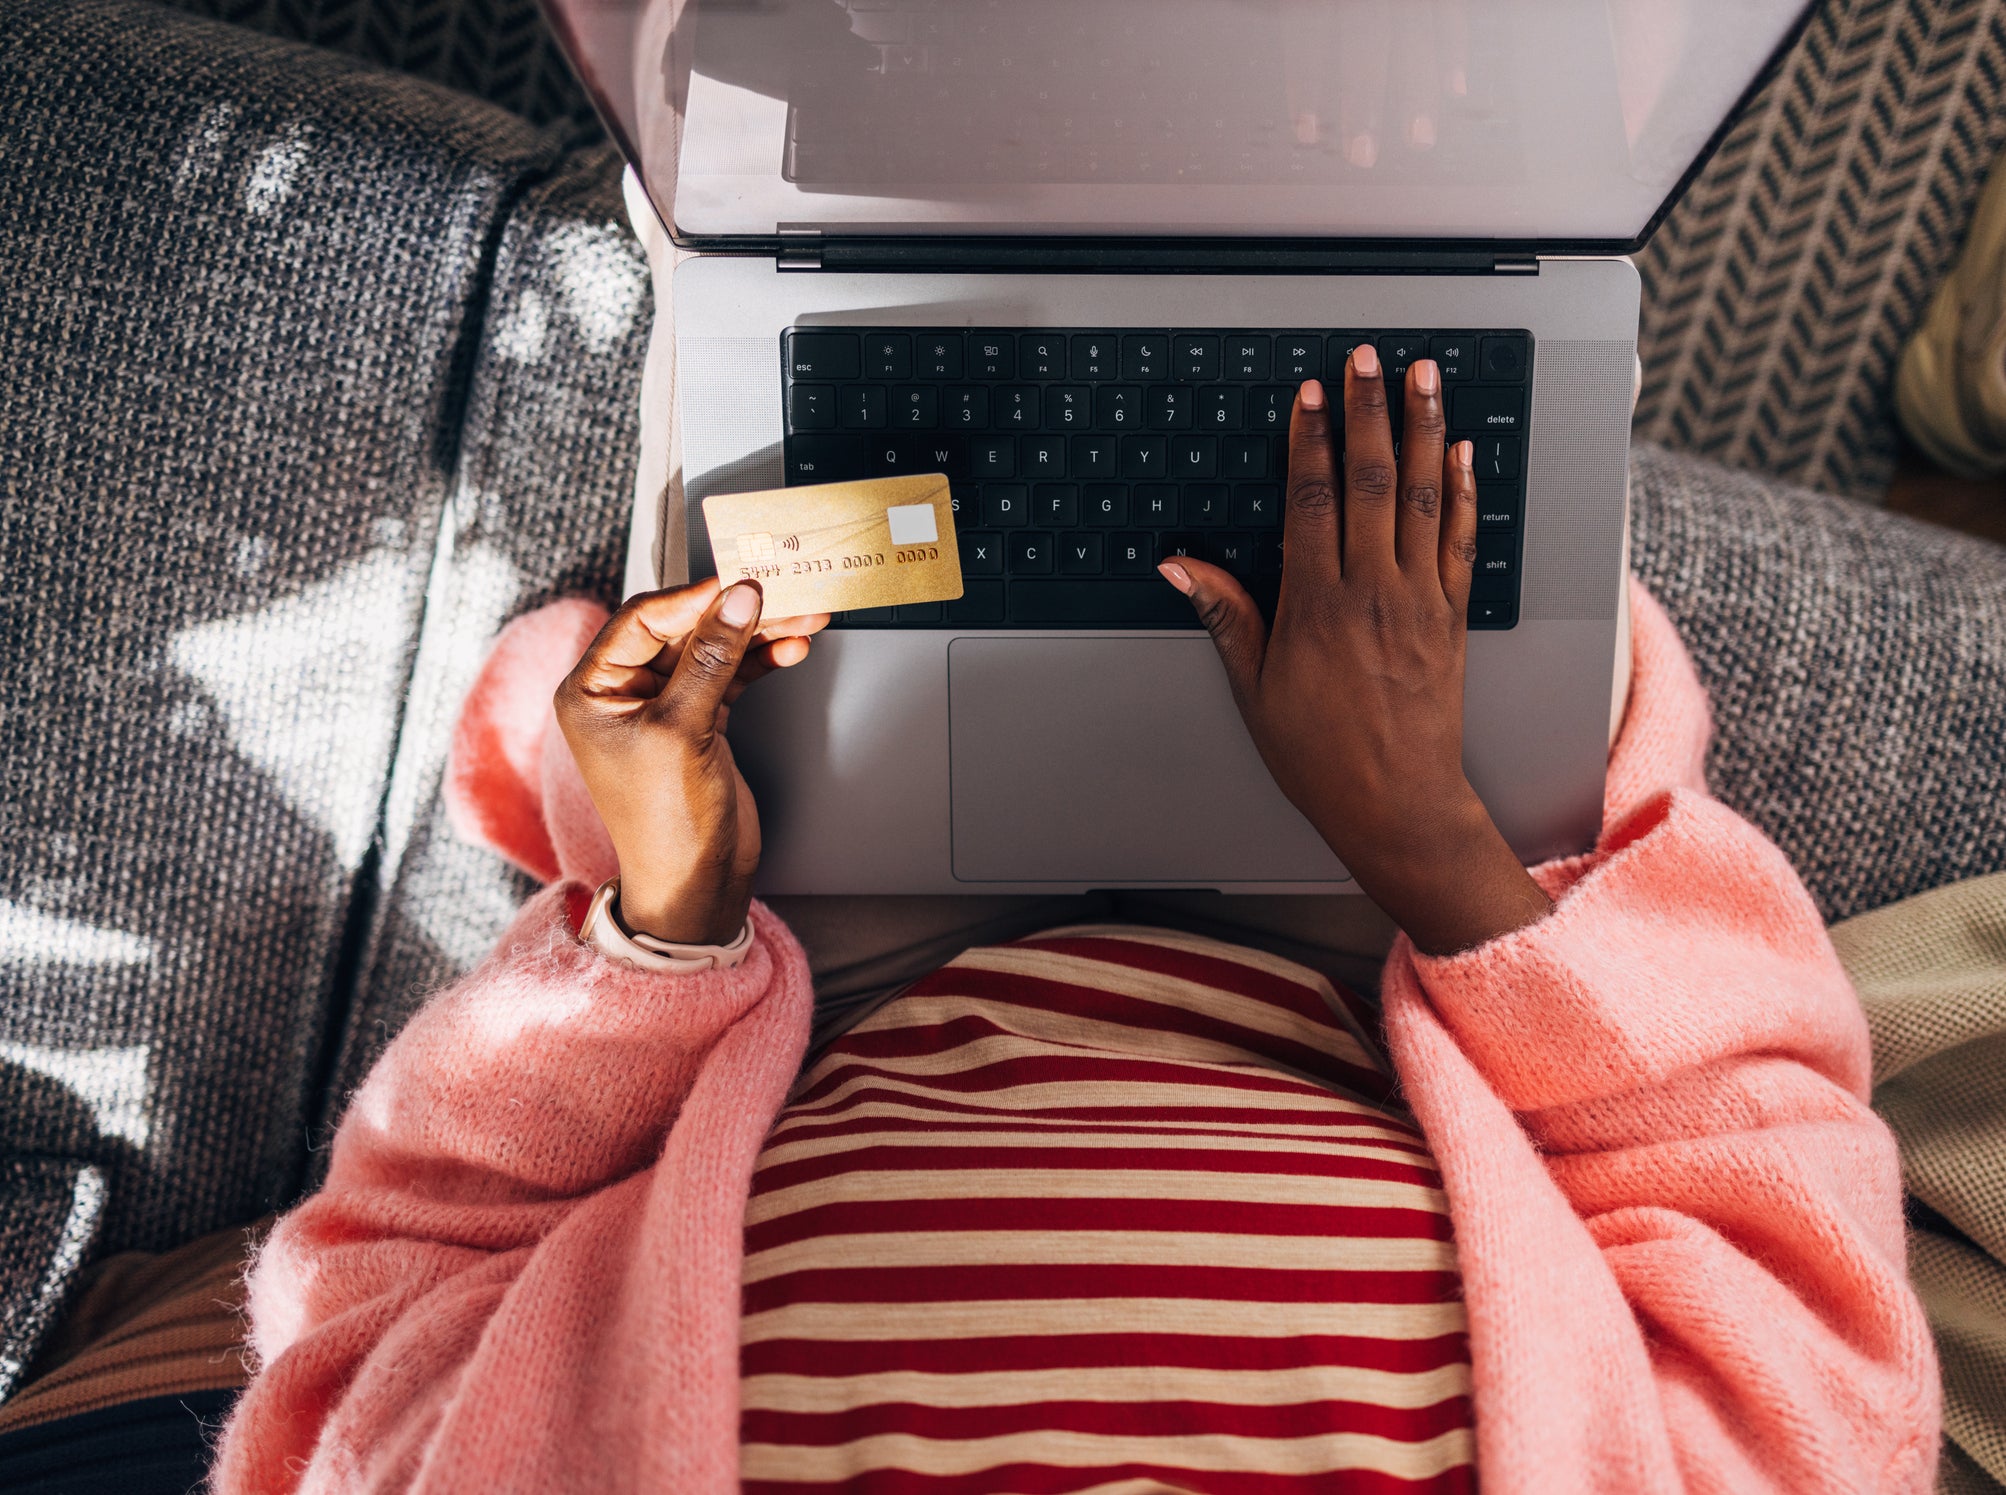 Ordered Something Online And It Never Came? It Could Be A Scam—Here's How To Protect Yourself